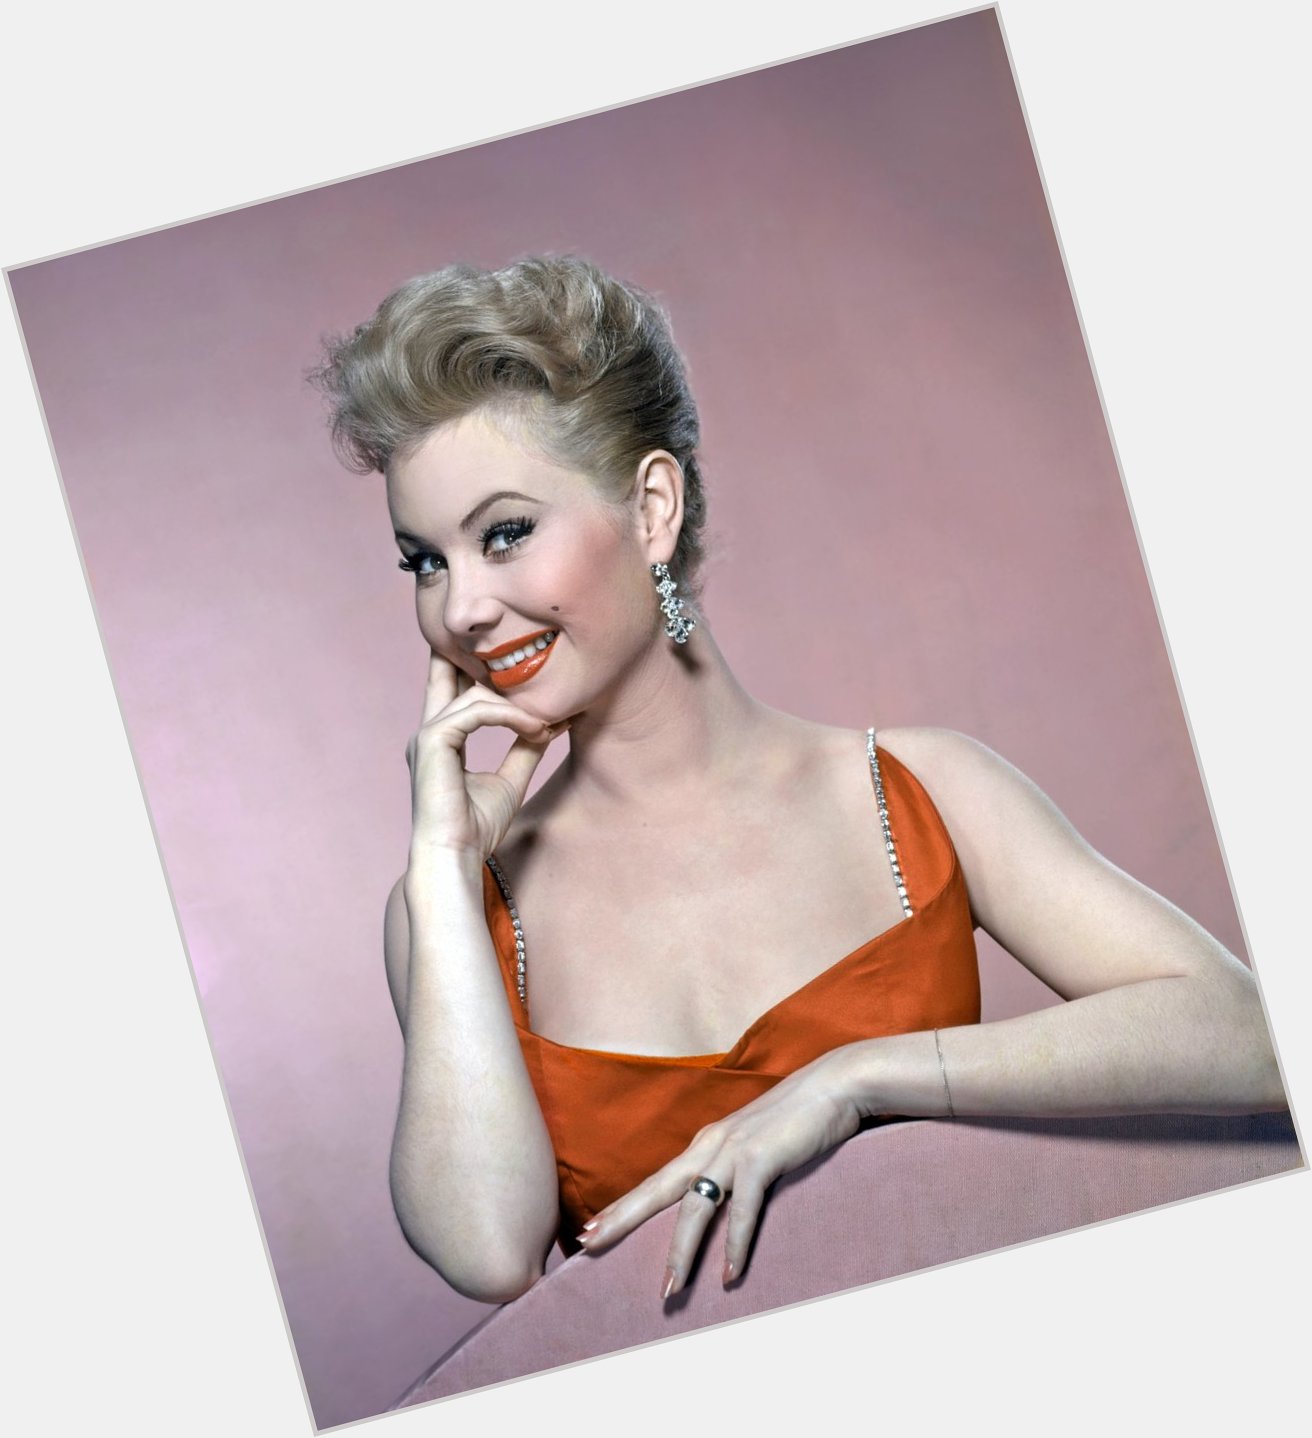 Happy 90th birthday to the lovely Mitzi Gaynor, who was born on Sept. 4, 1931, in Chicago.  